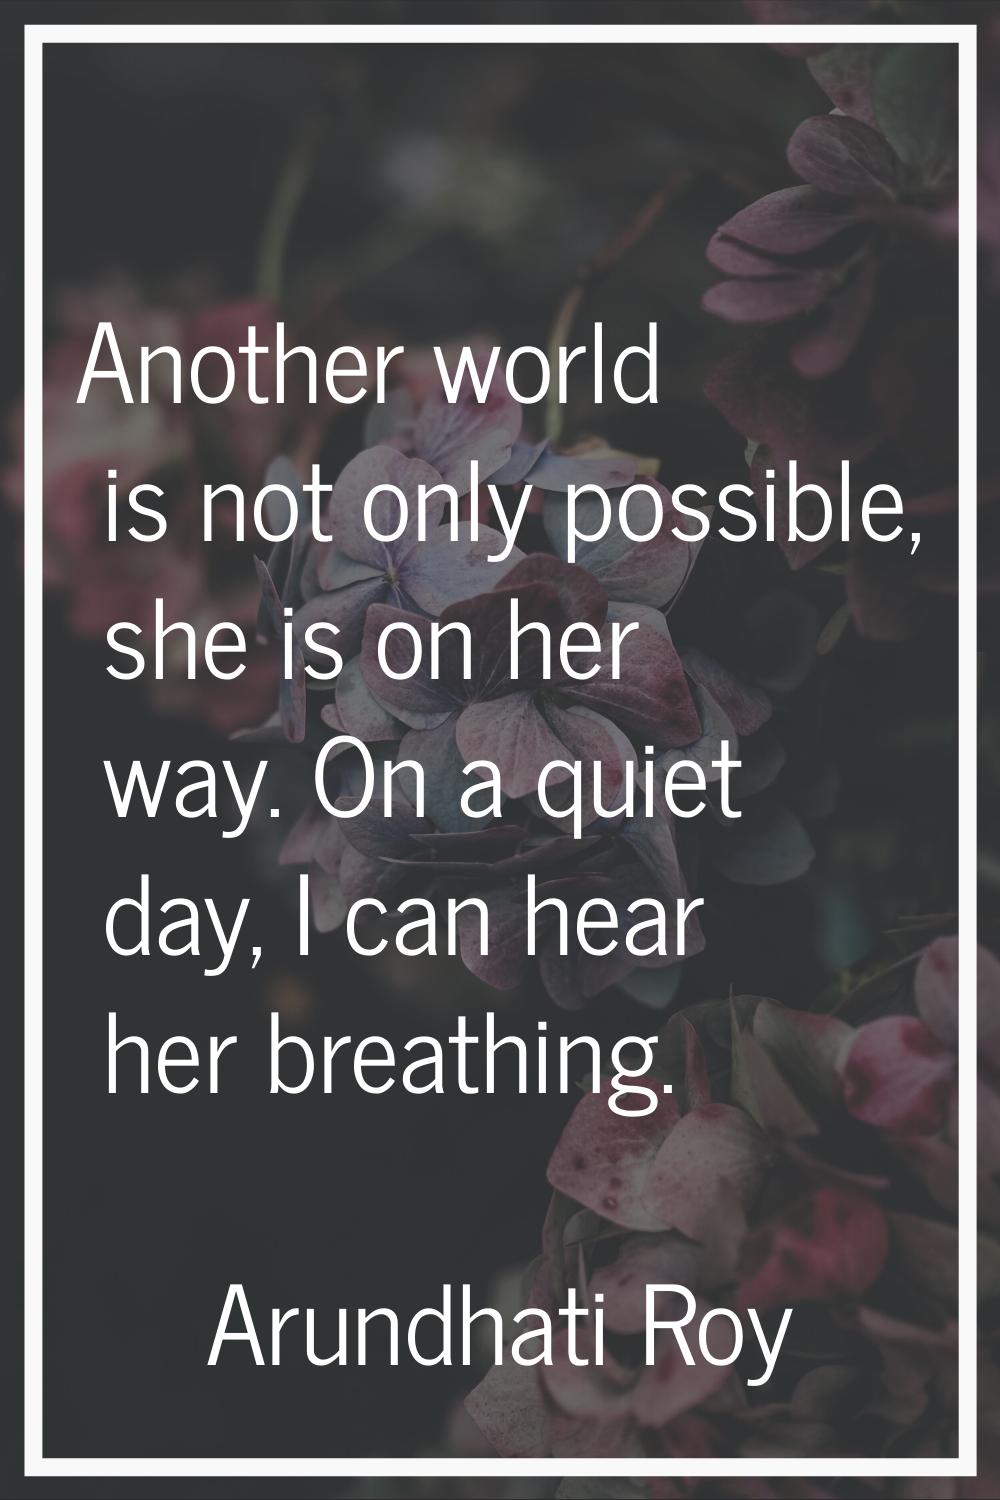 Another world is not only possible, she is on her way. On a quiet day, I can hear her breathing.